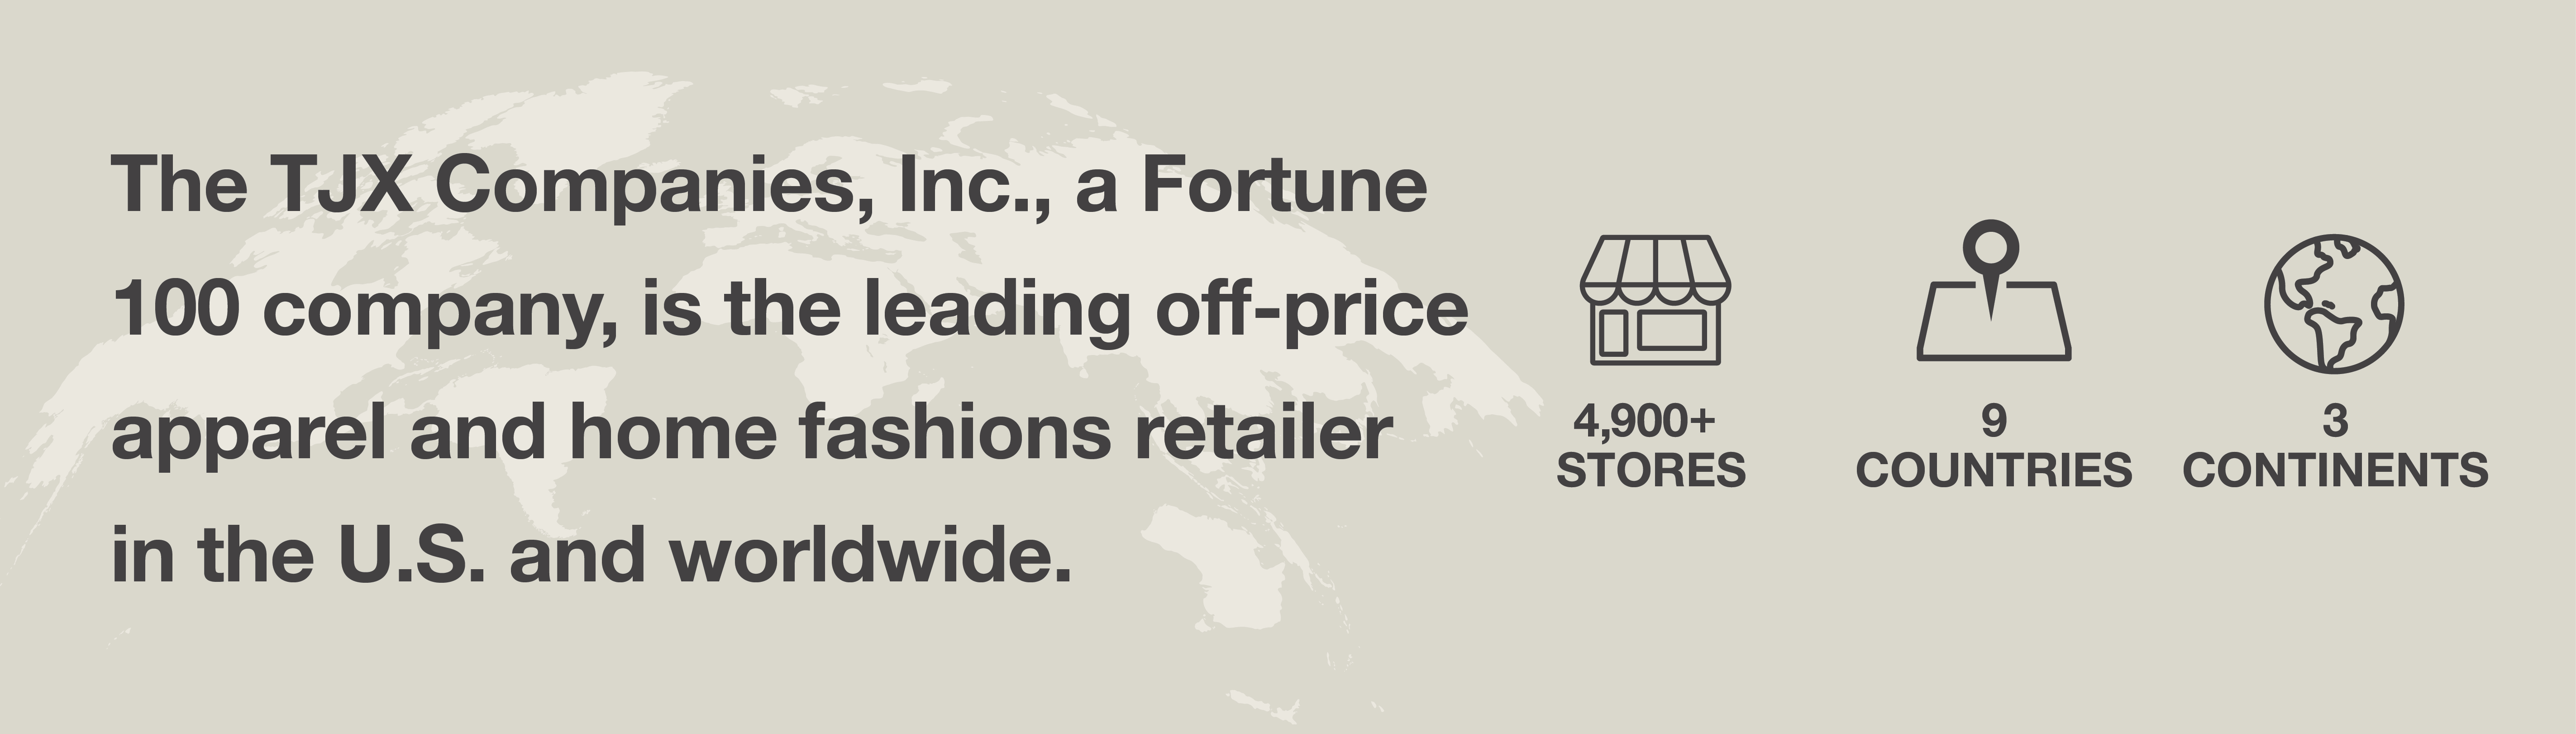 TJX leading off-price retailer with 4,800+ stores in 9 countries on 3 continents